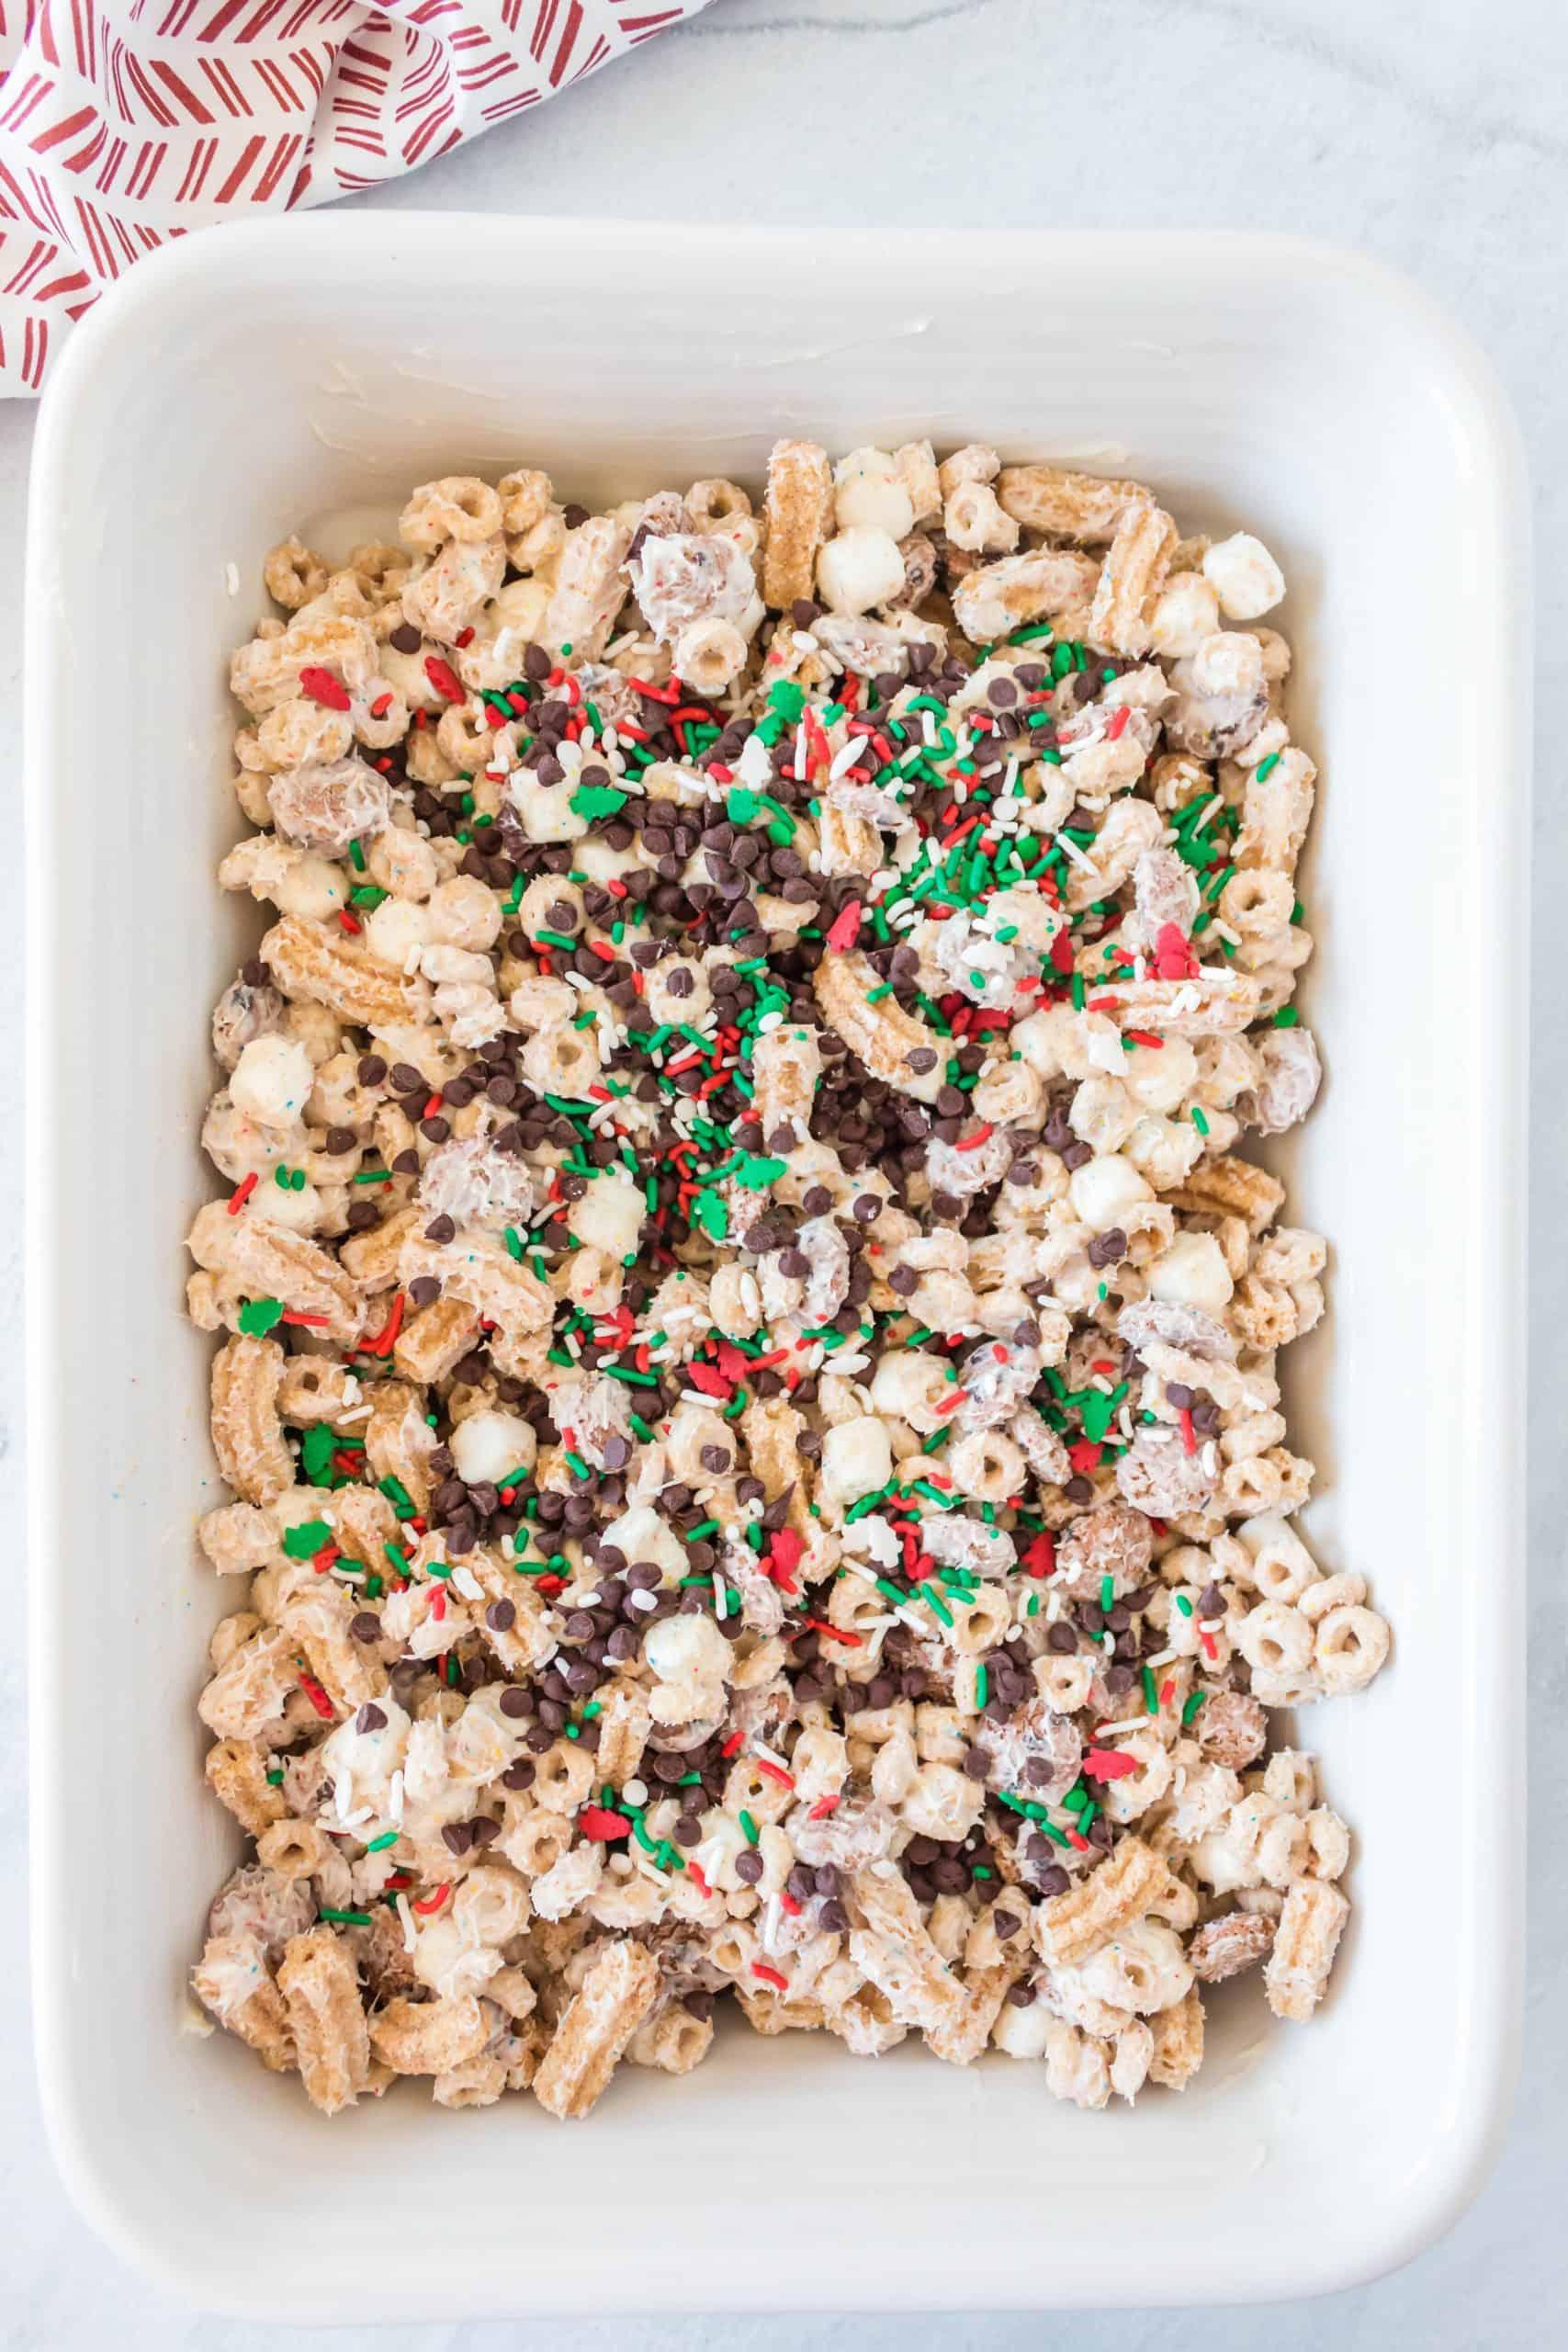 sprinkles and mini chocolate chips added to the top of chocolate cereal mixture.